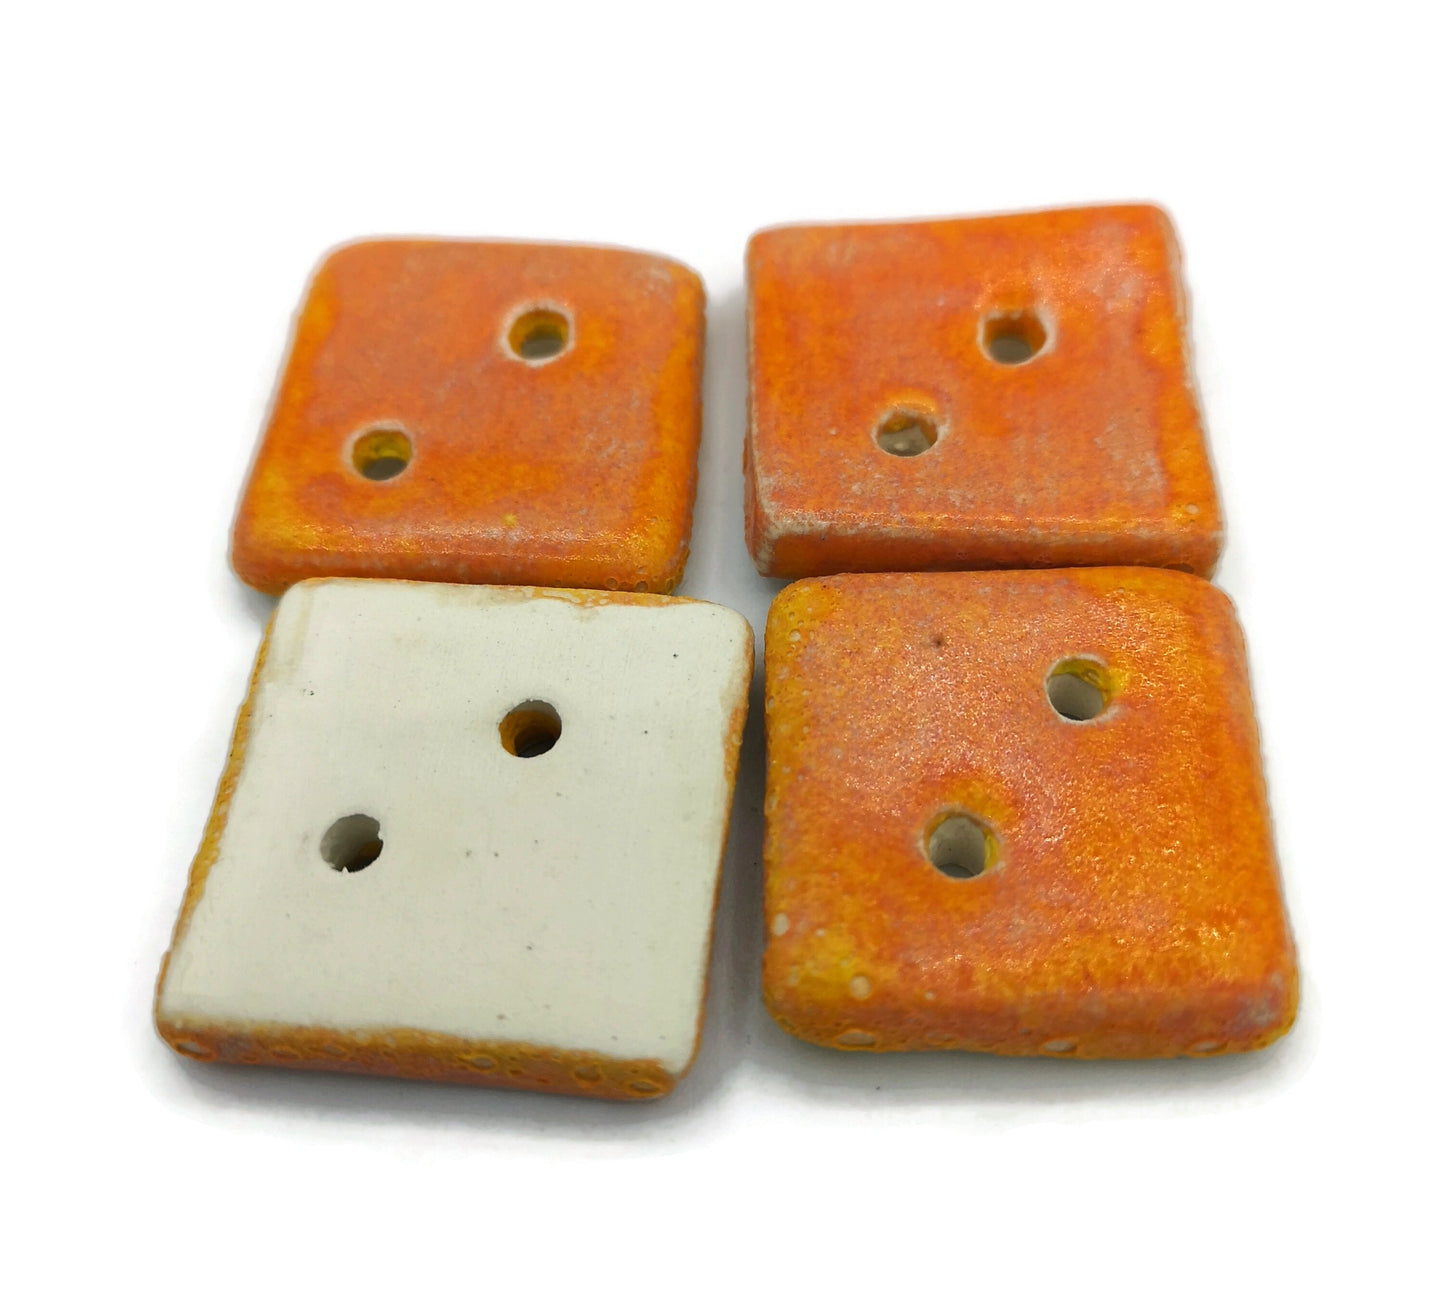 4Pc 30mm Extra Large Buttons, Orange Buttons Square, Handmade Ceramic Craft Sewing Buttons, Fancy Clay Coat Buttons 2 Holes Flatback - Ceramica Ana Rafael